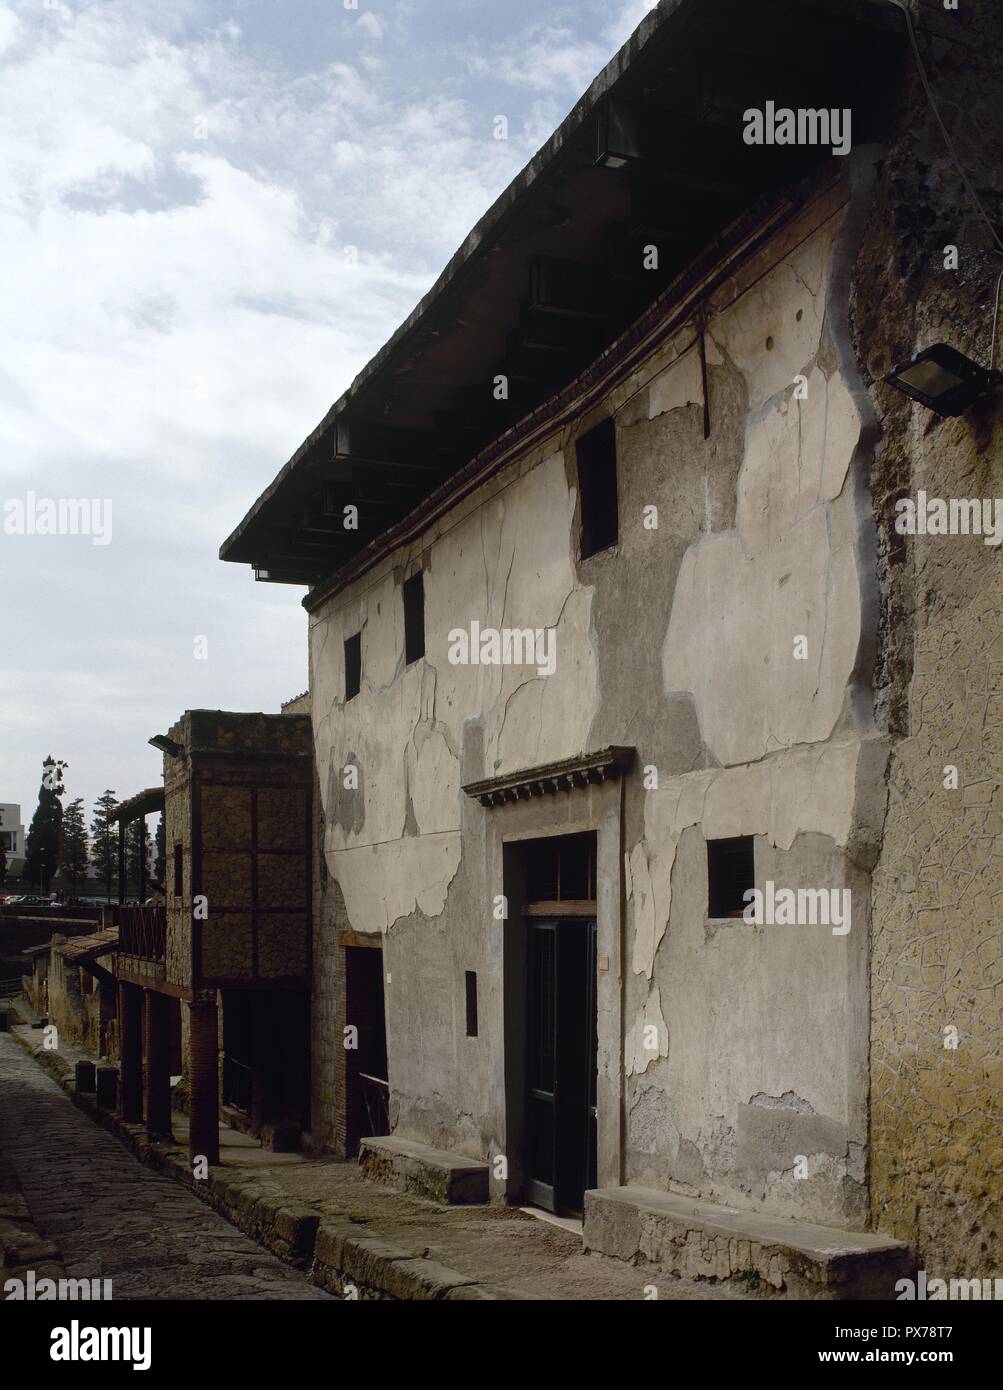 Herculaneum. Ancient Roman city destroyed because of the eruption of the Vesuvius at 79 AD. House of the Wooden Partition (Casa del Tramezzo di Legno), of Republican period. Italy. Stock Photo